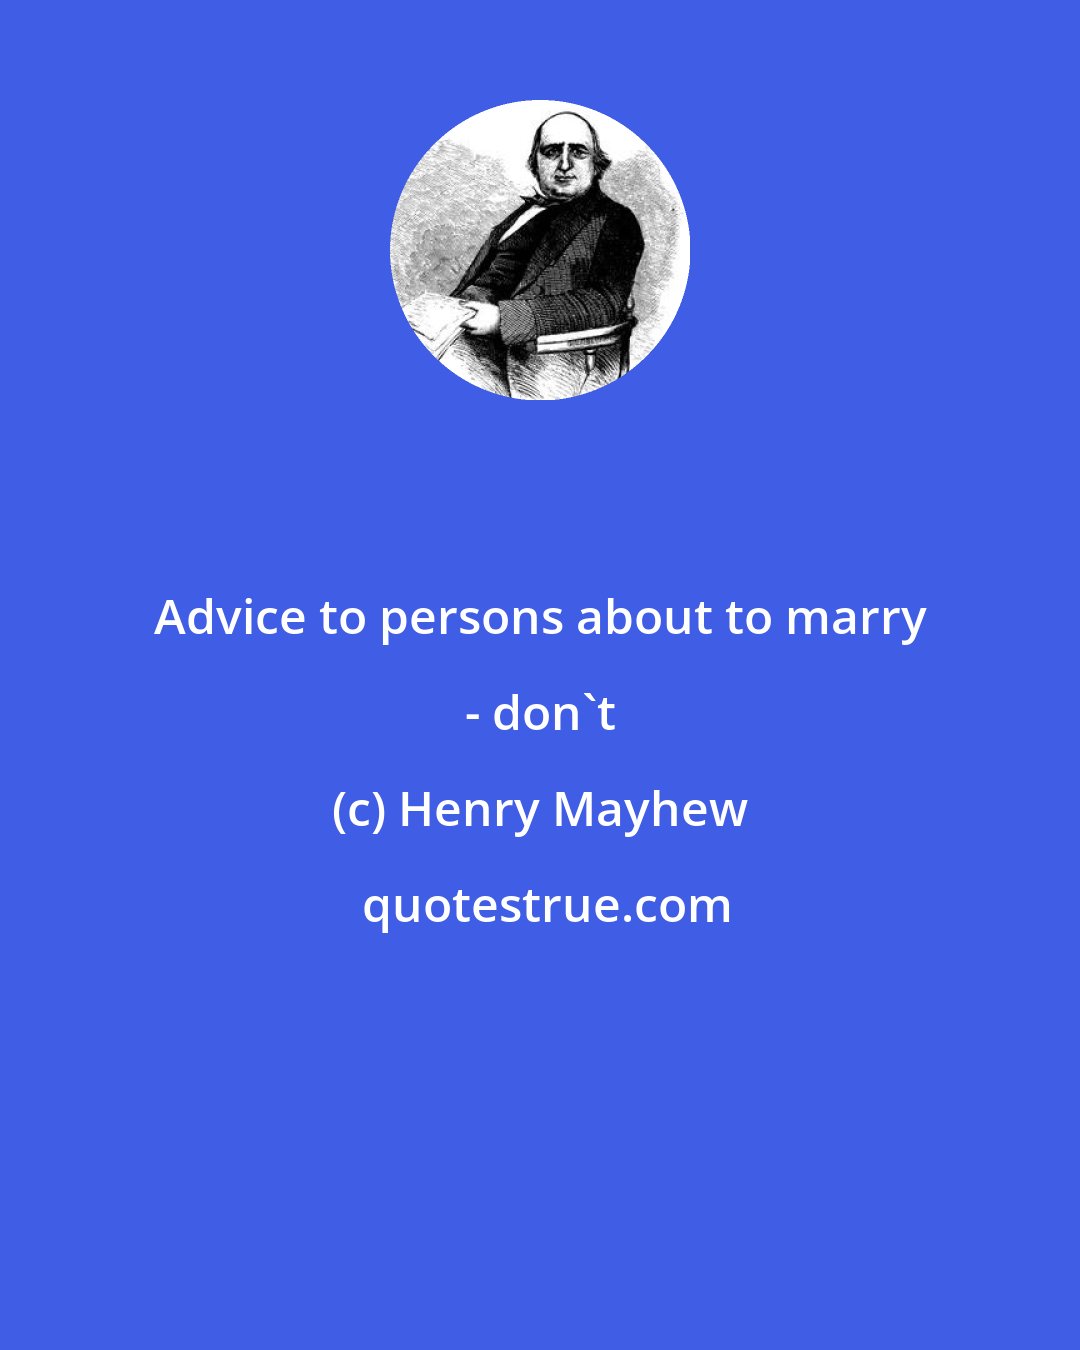 Henry Mayhew: Advice to persons about to marry - don't